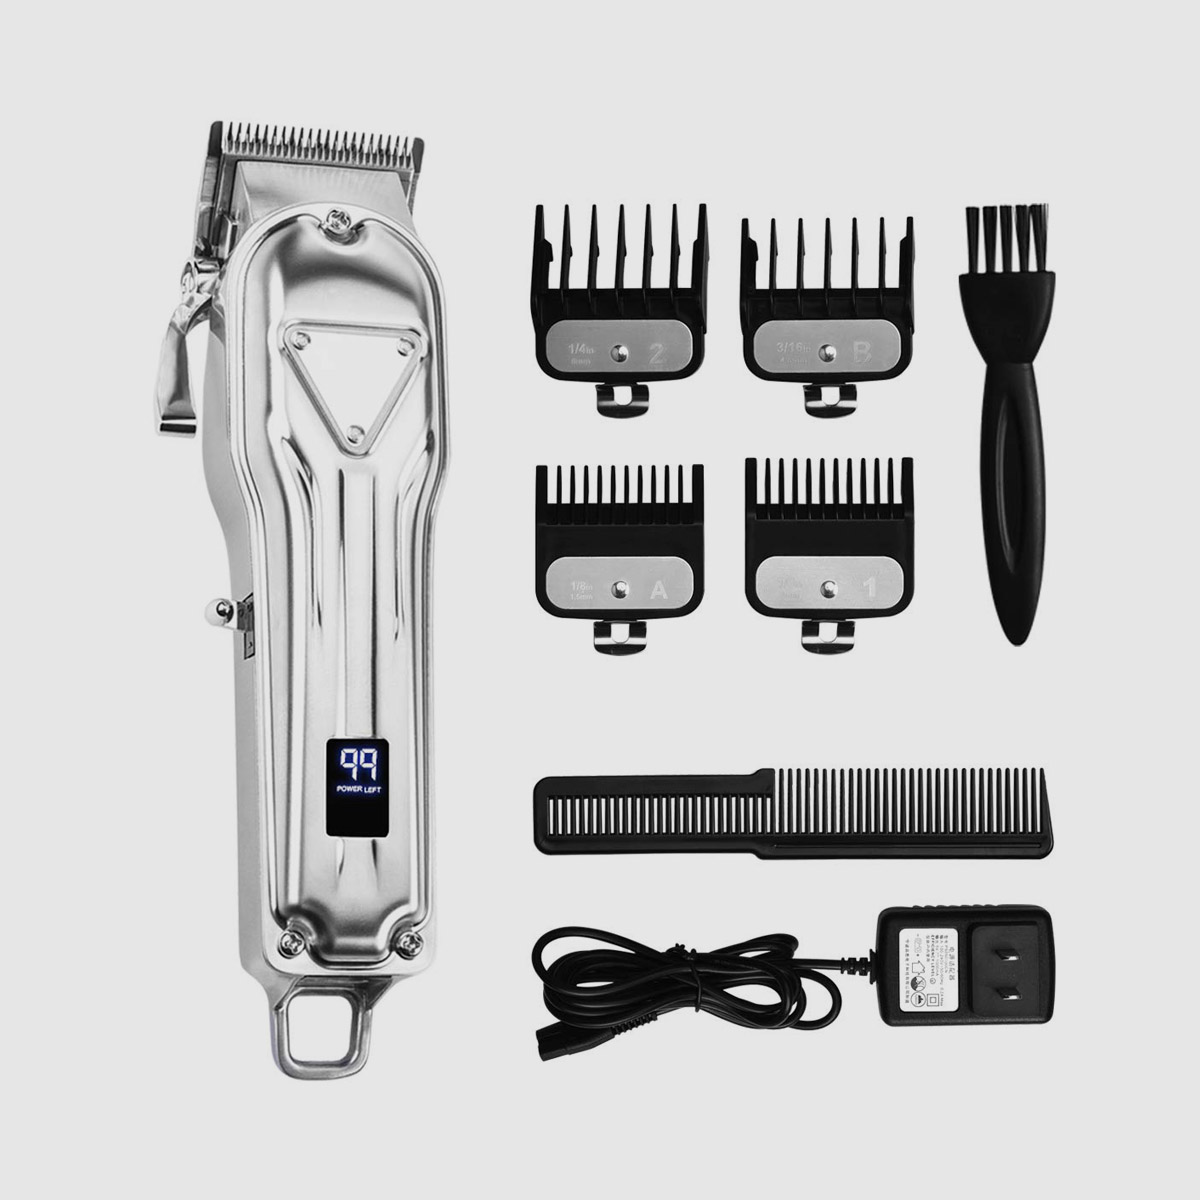 Pro Cordless Hair Clippers para sa Men Stylists Barbers Kids Home Gamit